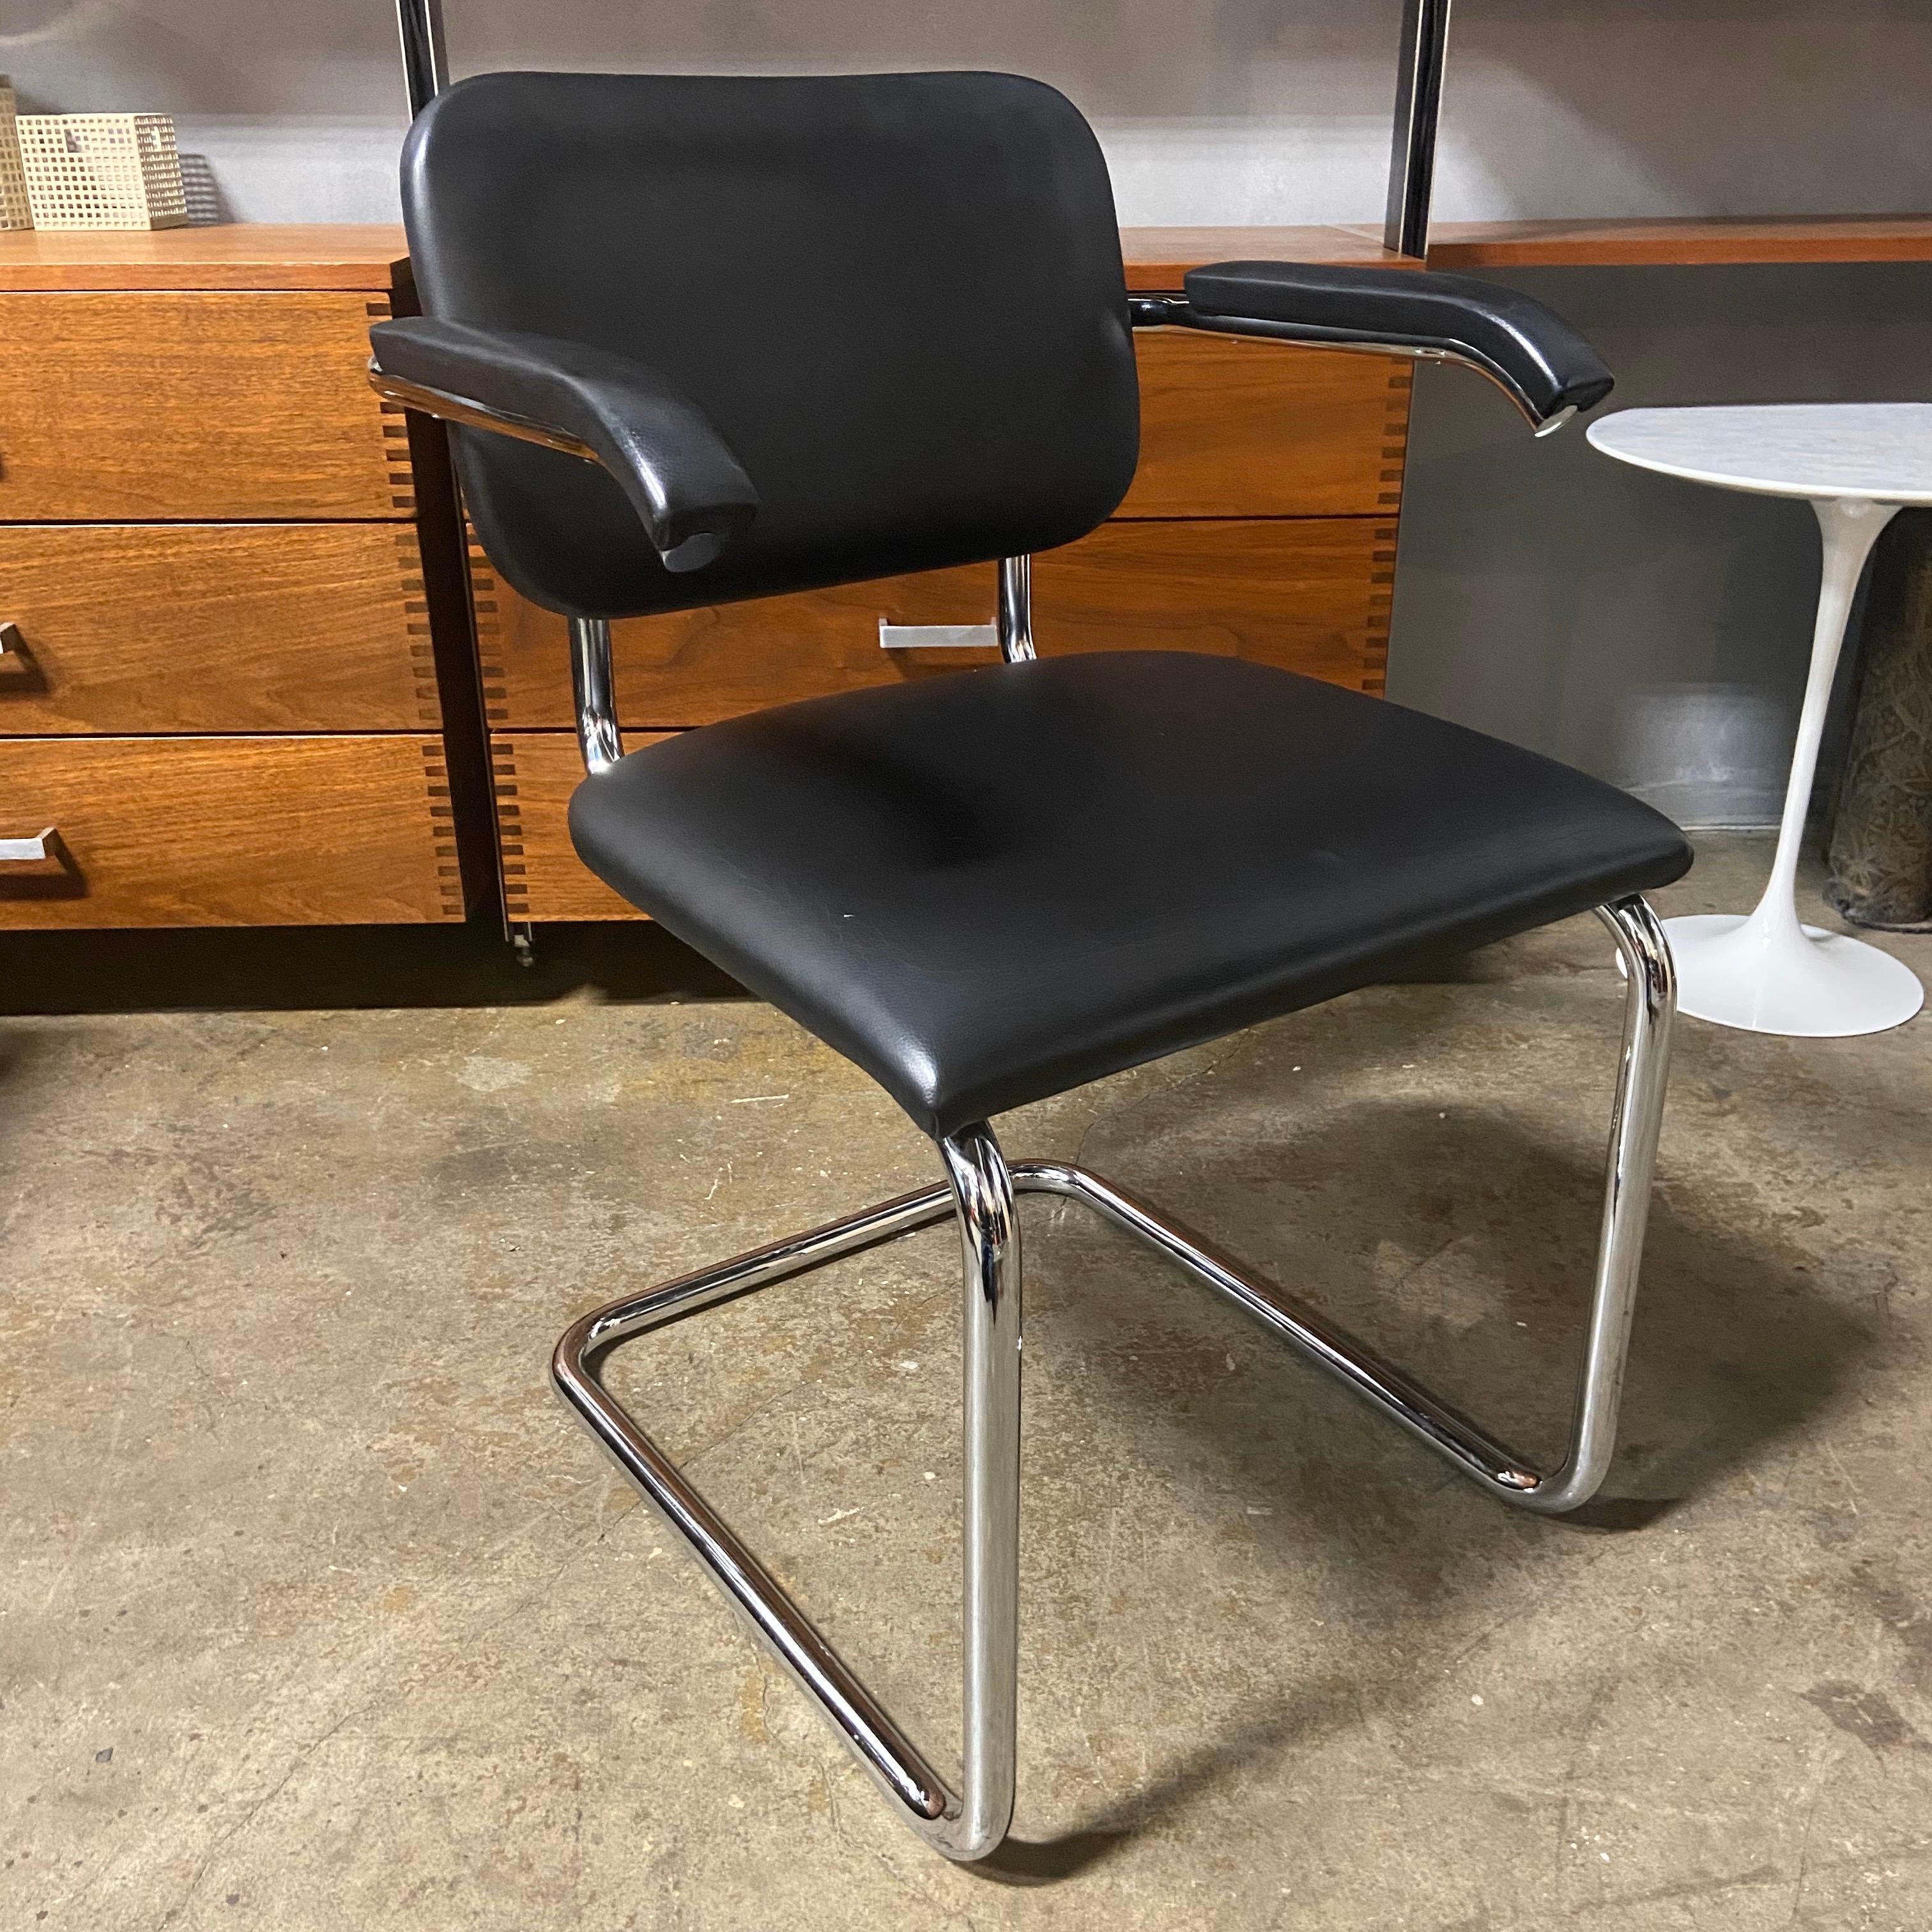 4 Authentic Midcentury Cesca Chairs by Marcel Breuer for Knoll 1